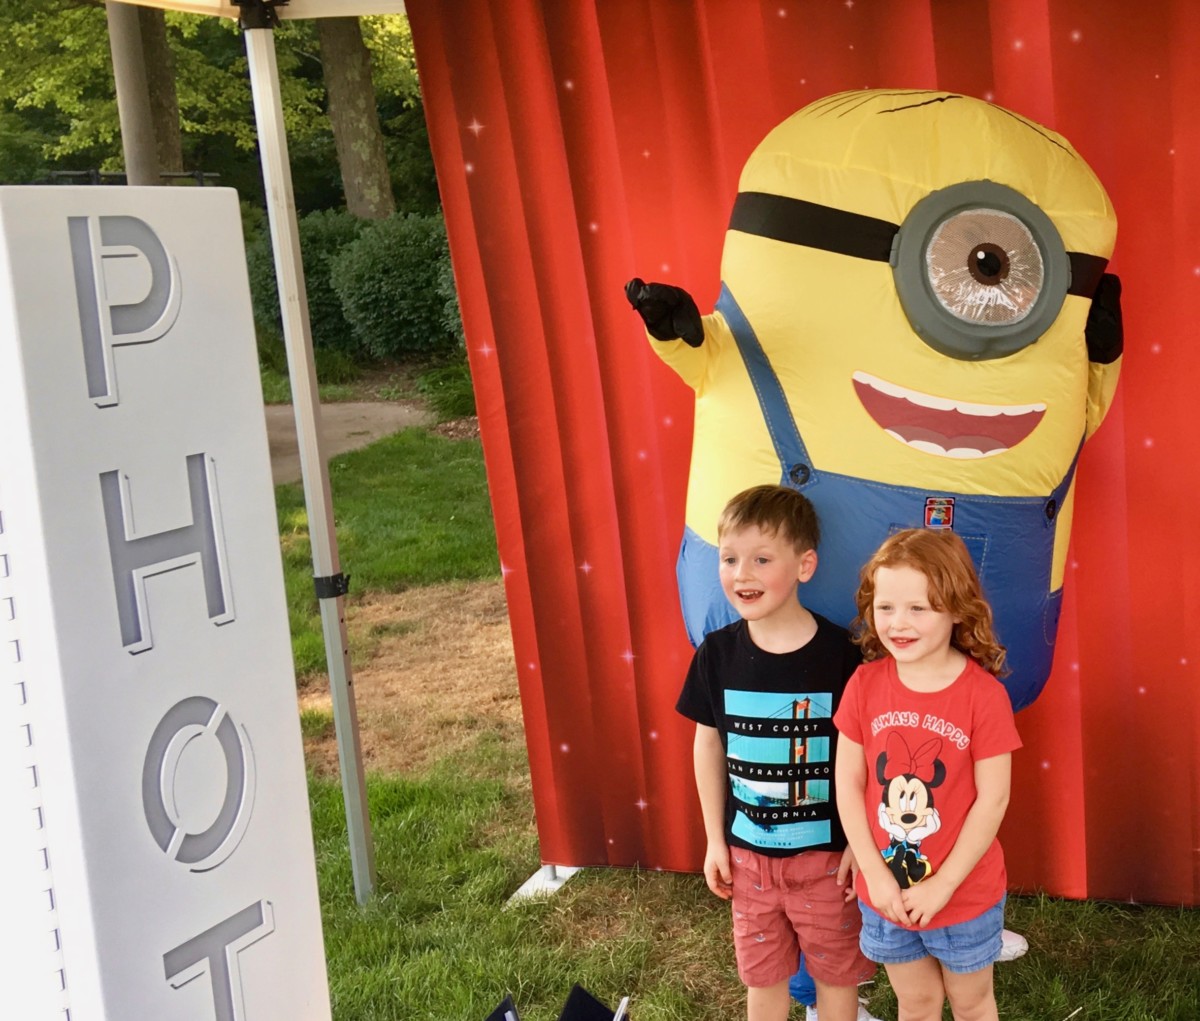 Posing with a Minion